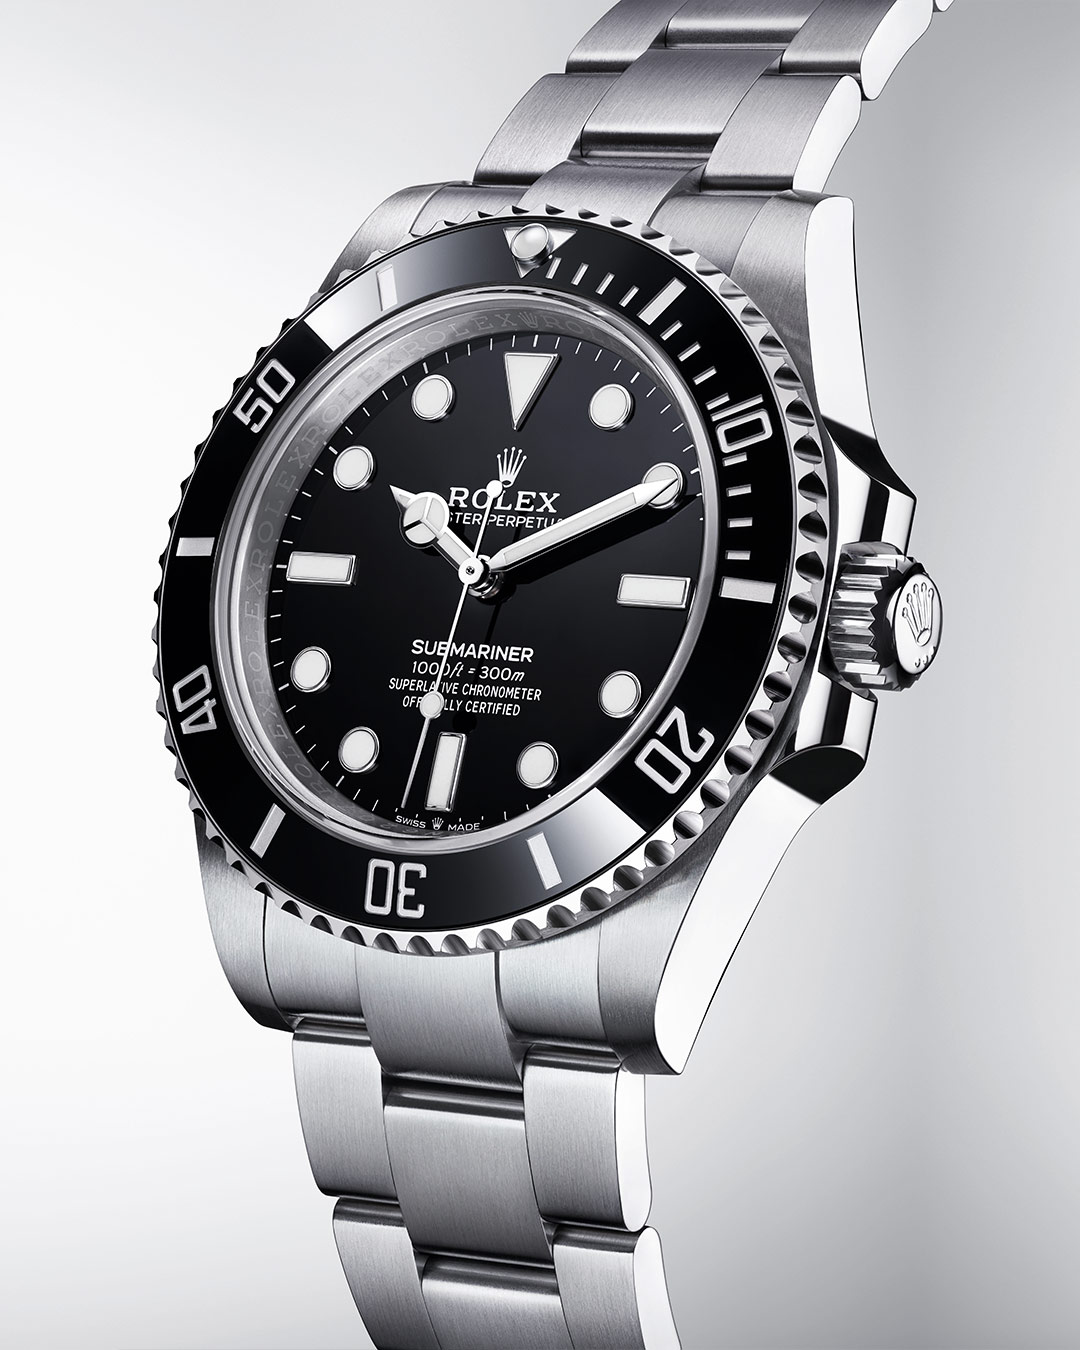 Rolex New Watches 2020: Oyster 